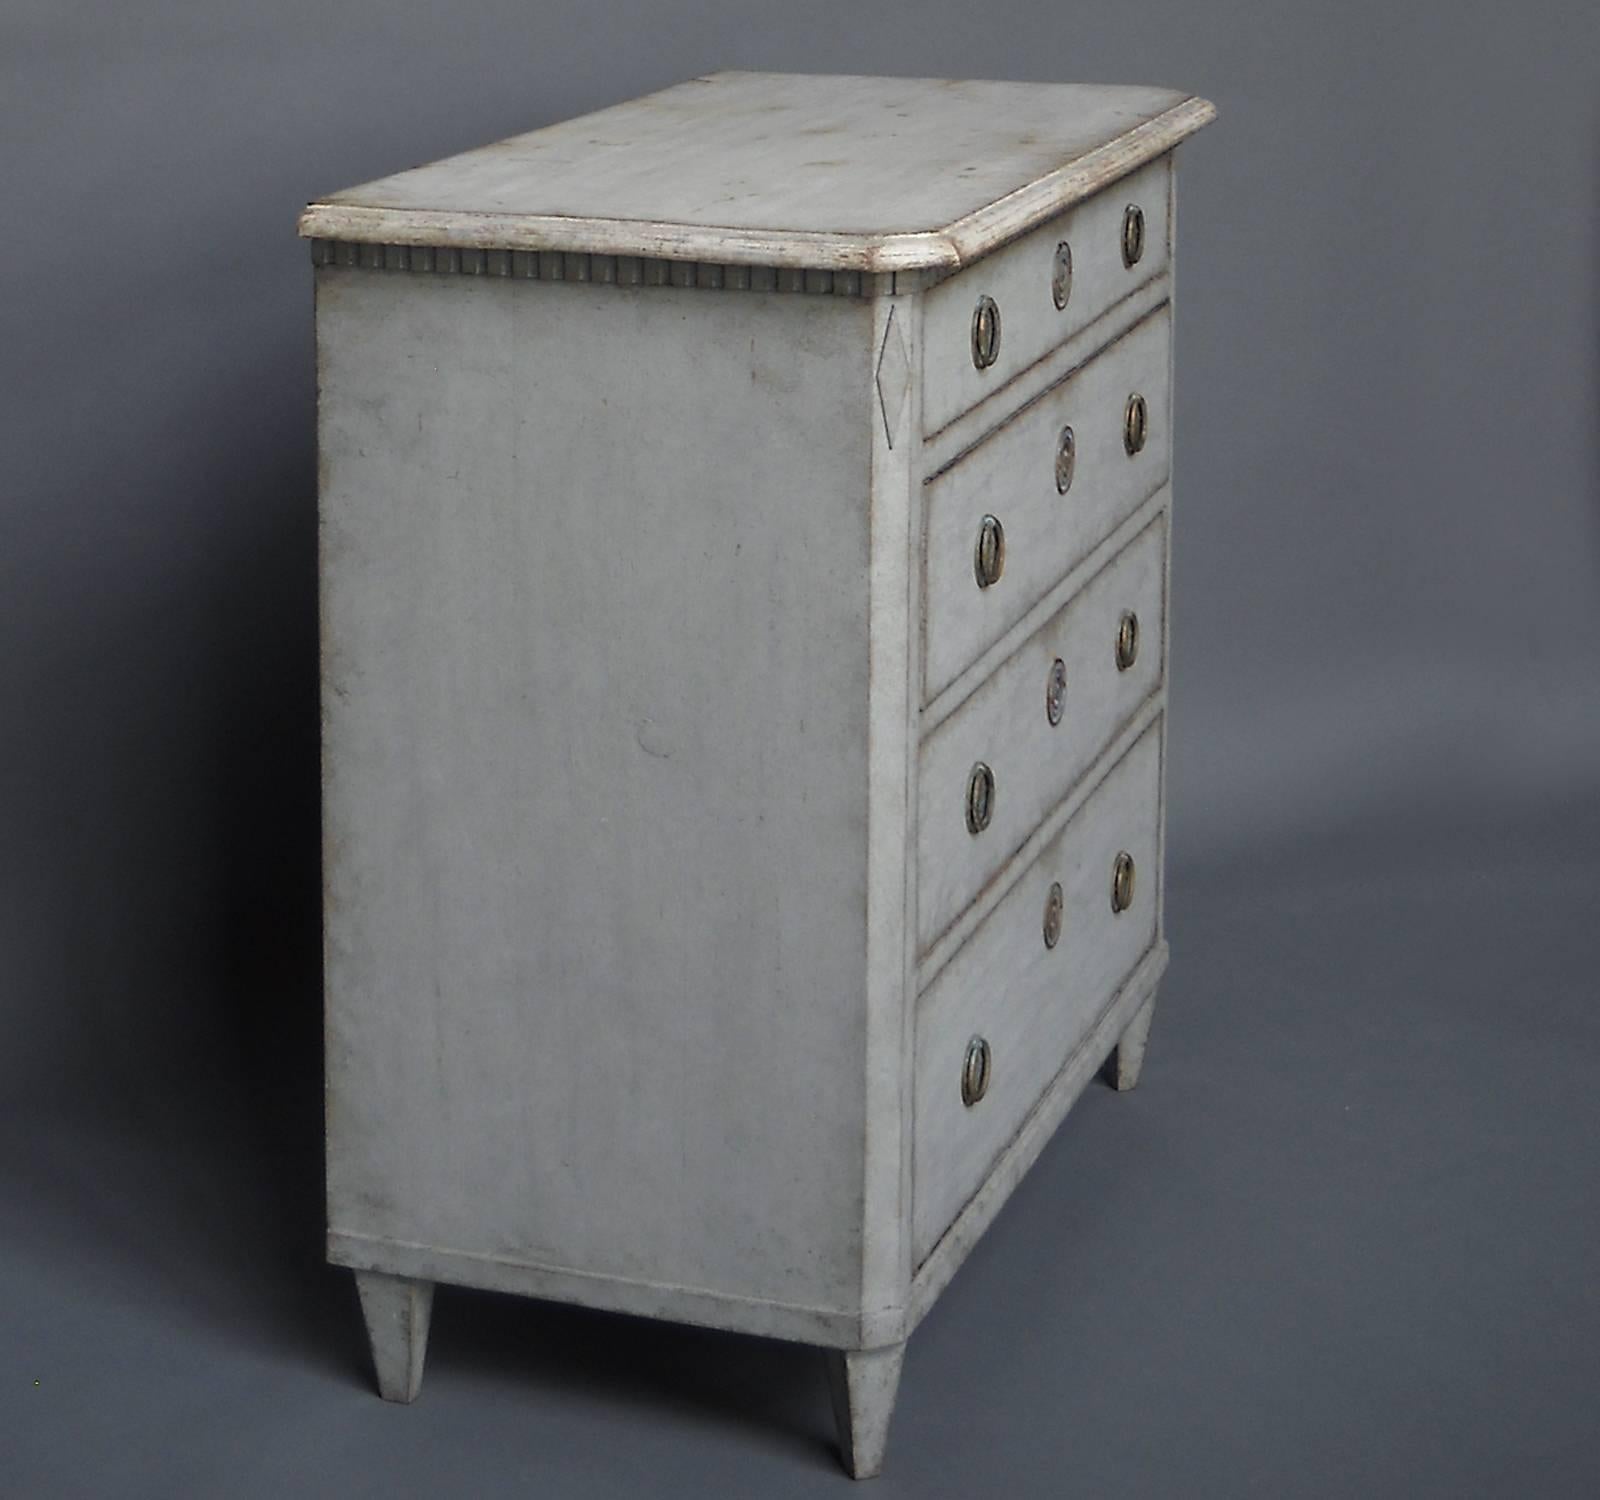 Gustavian style chest with four graduated drawers, Sweden, circa 1860. Dentil molding at the top and canted corners with applied lozenges. Brass hardware.